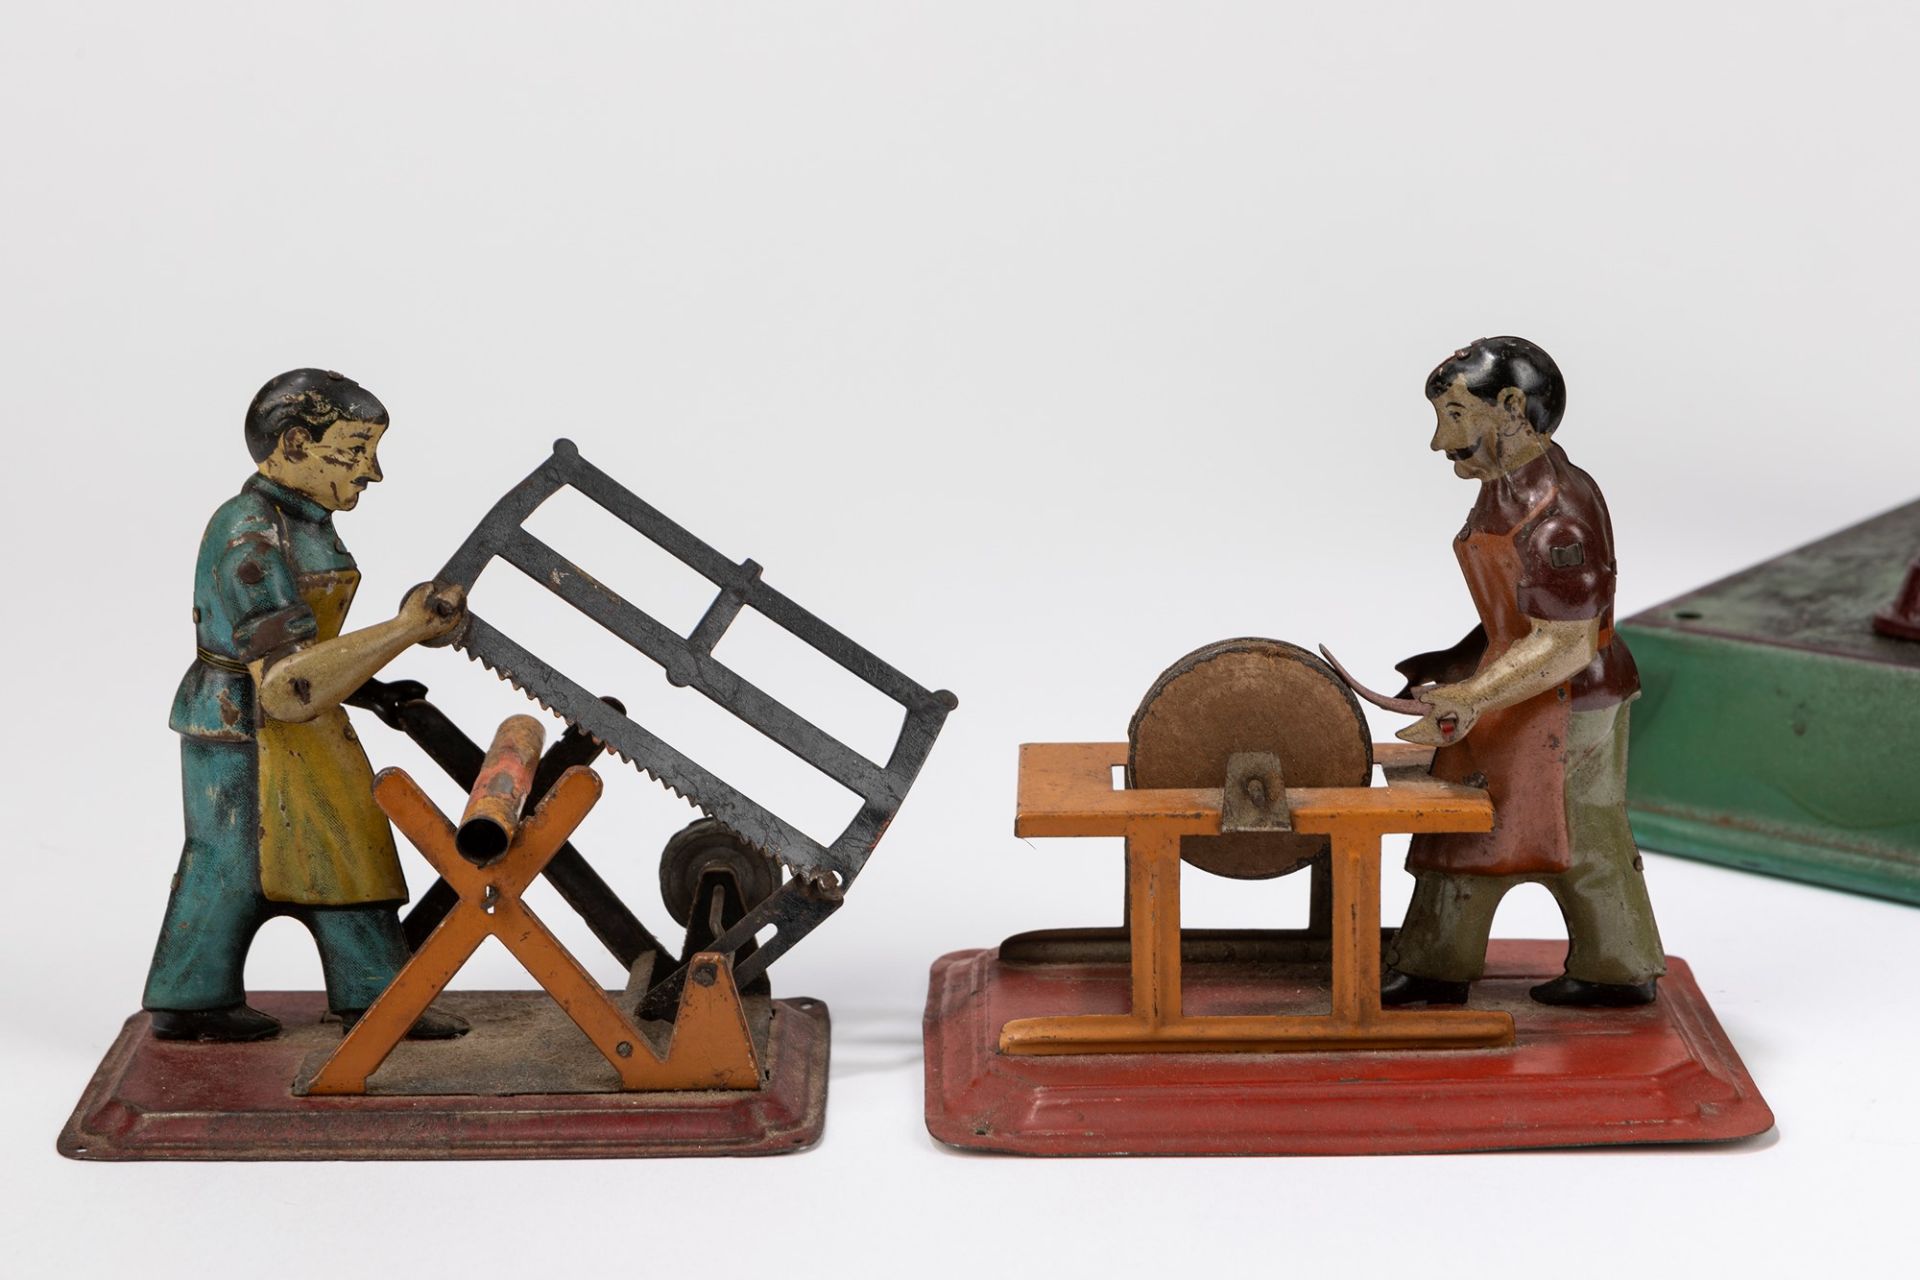 Marklin - Steam engine and two characters, 1930-1935 - Image 3 of 3